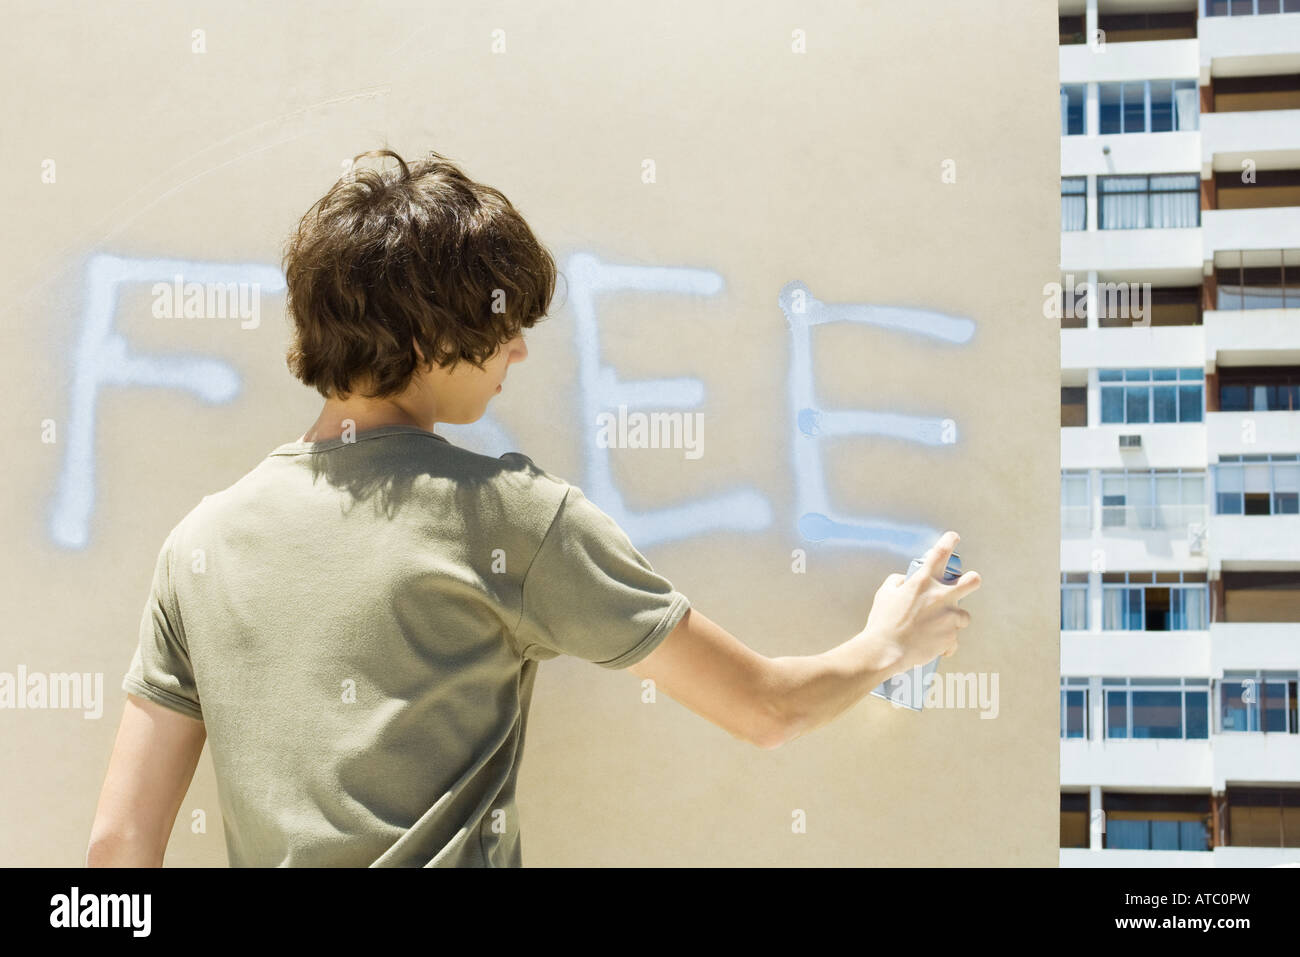 Teenage boy spray painting the word "free" on wall, rear view Stock Photo